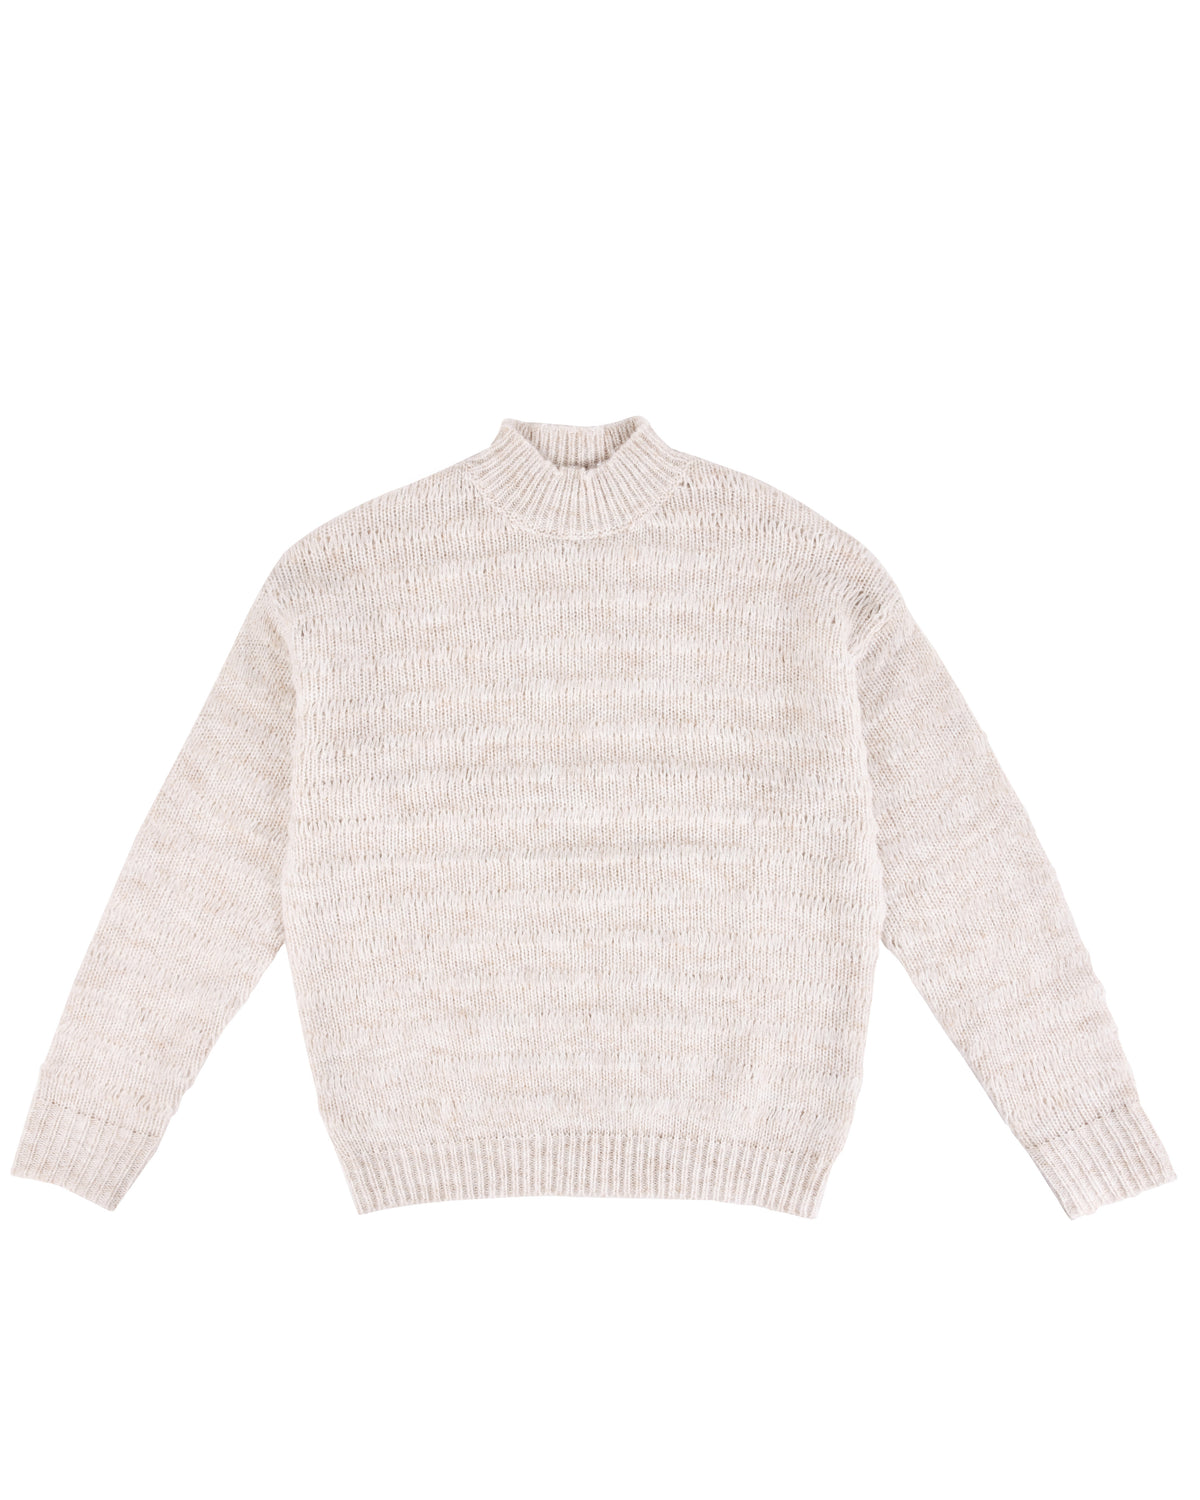 Recycled Knit Dunes Jumper - Sand